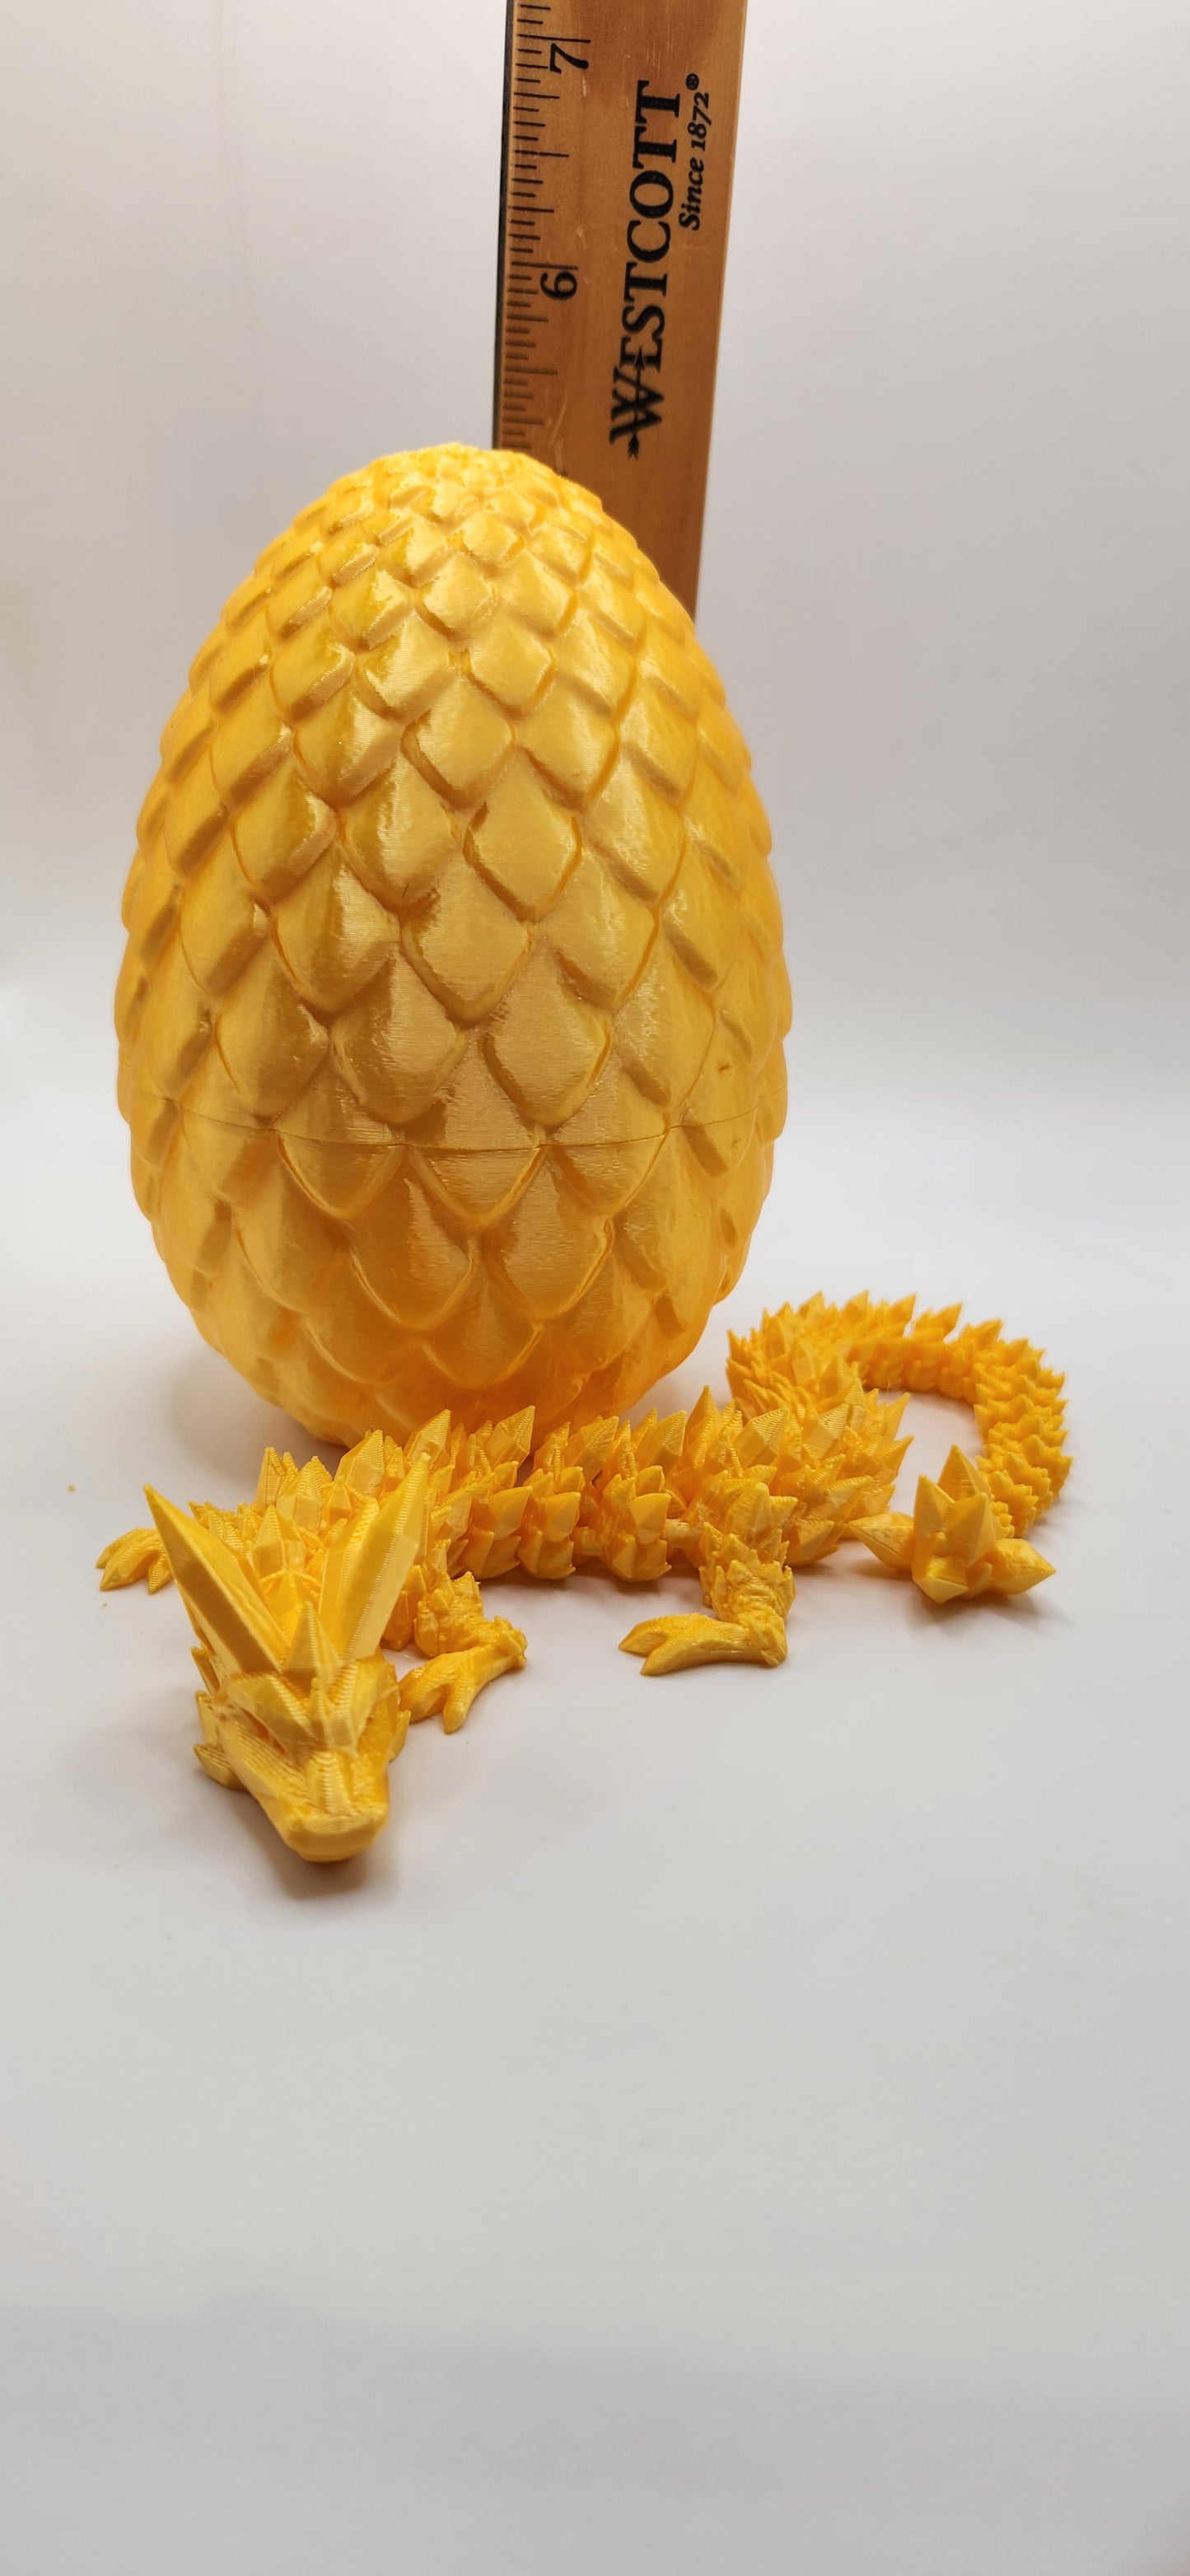 3D Large Dragon with Egg - Wiggle & Ding